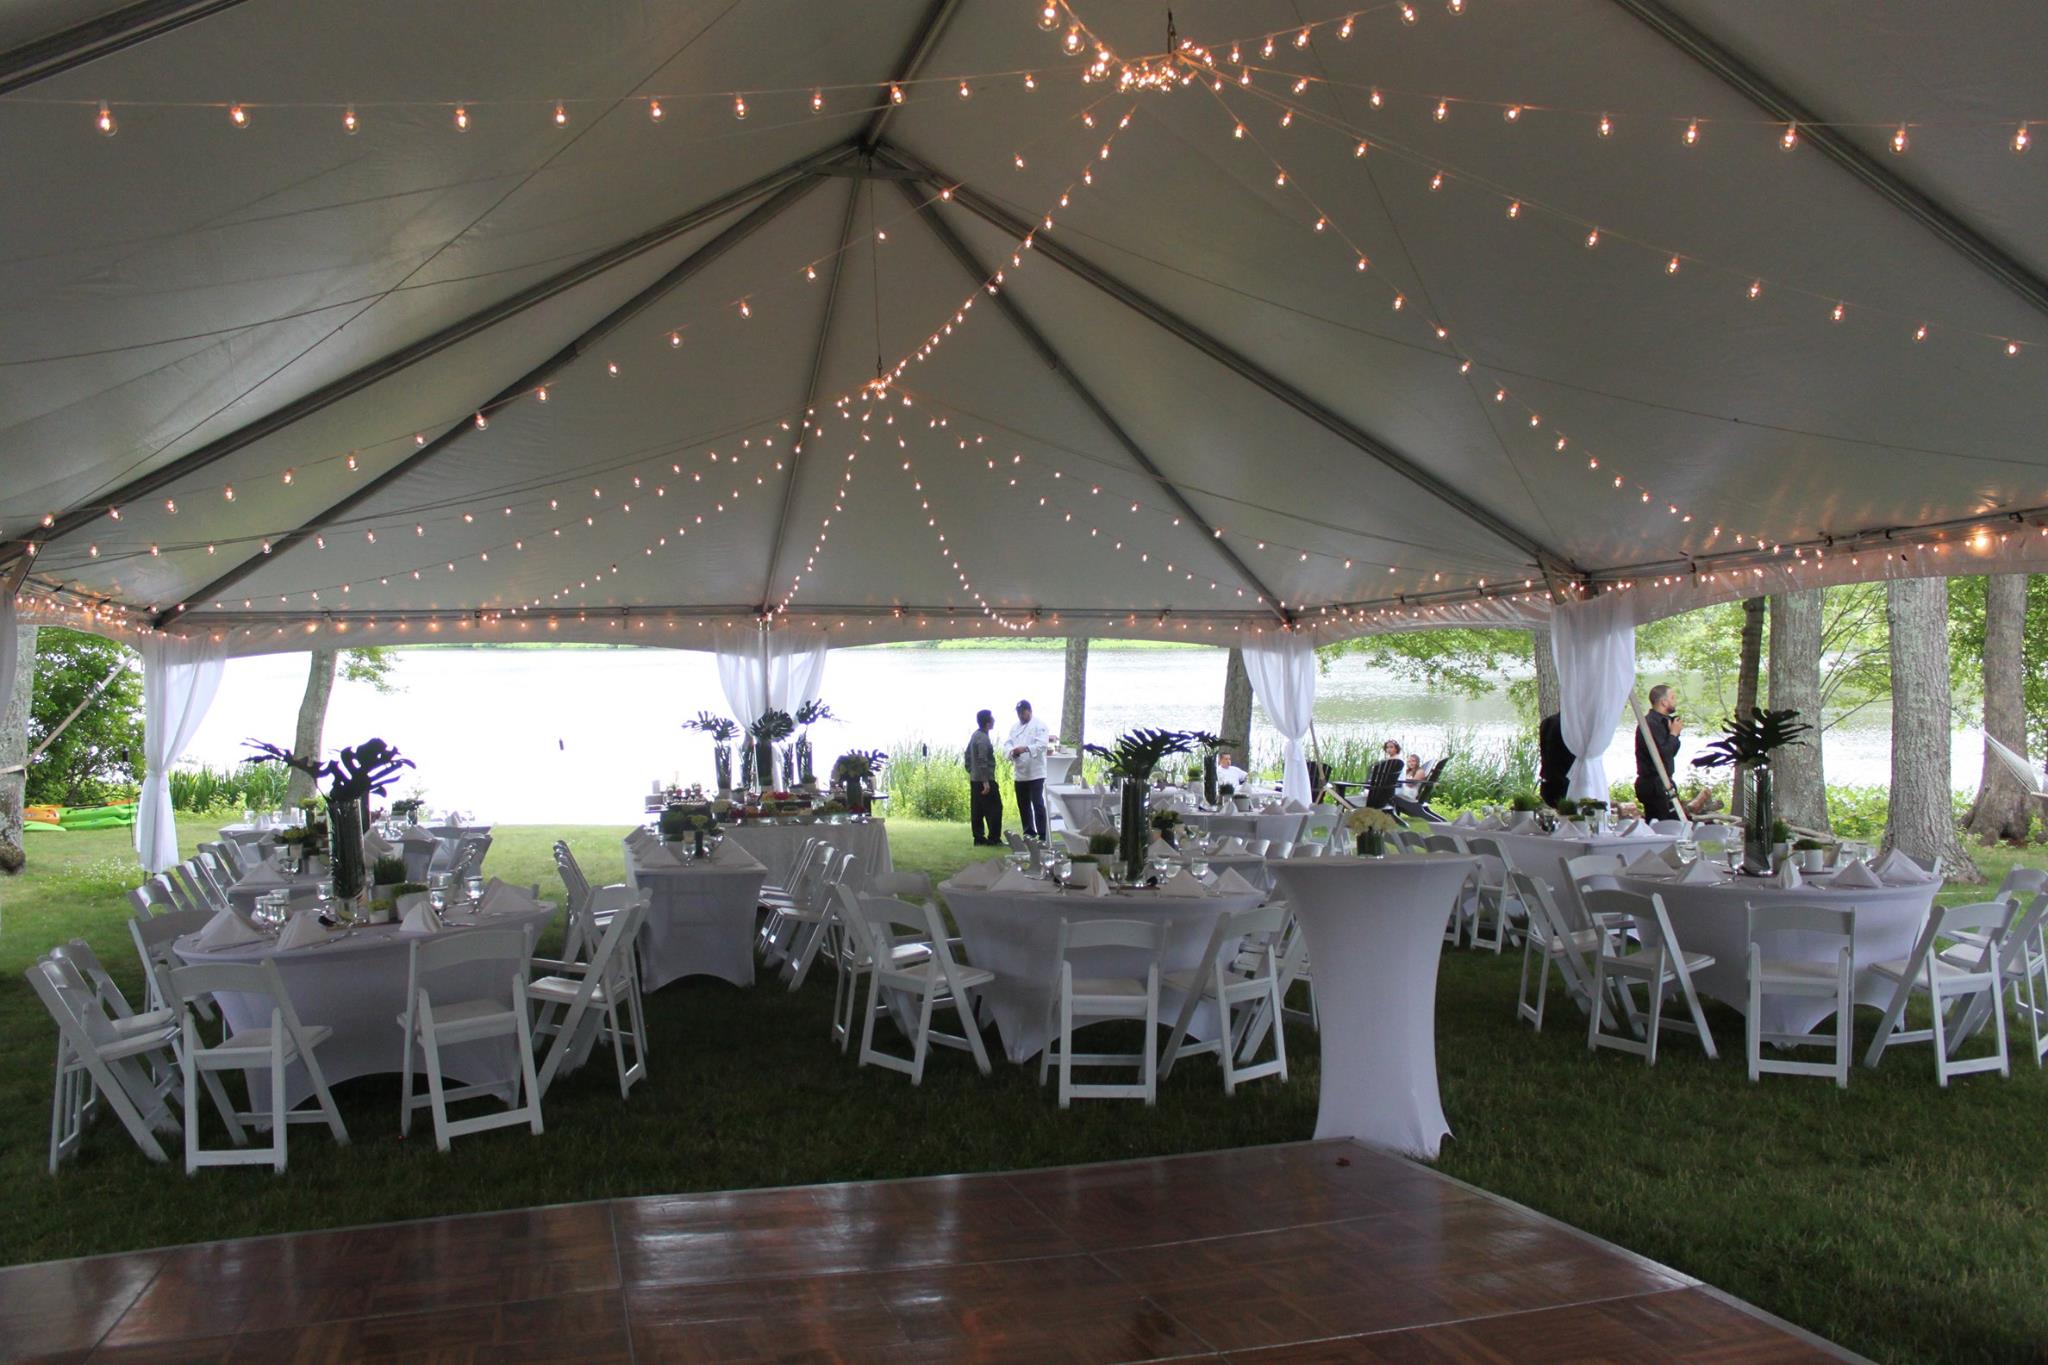 40x60 Frame Tent with Bistros and Parquet Dance Floor